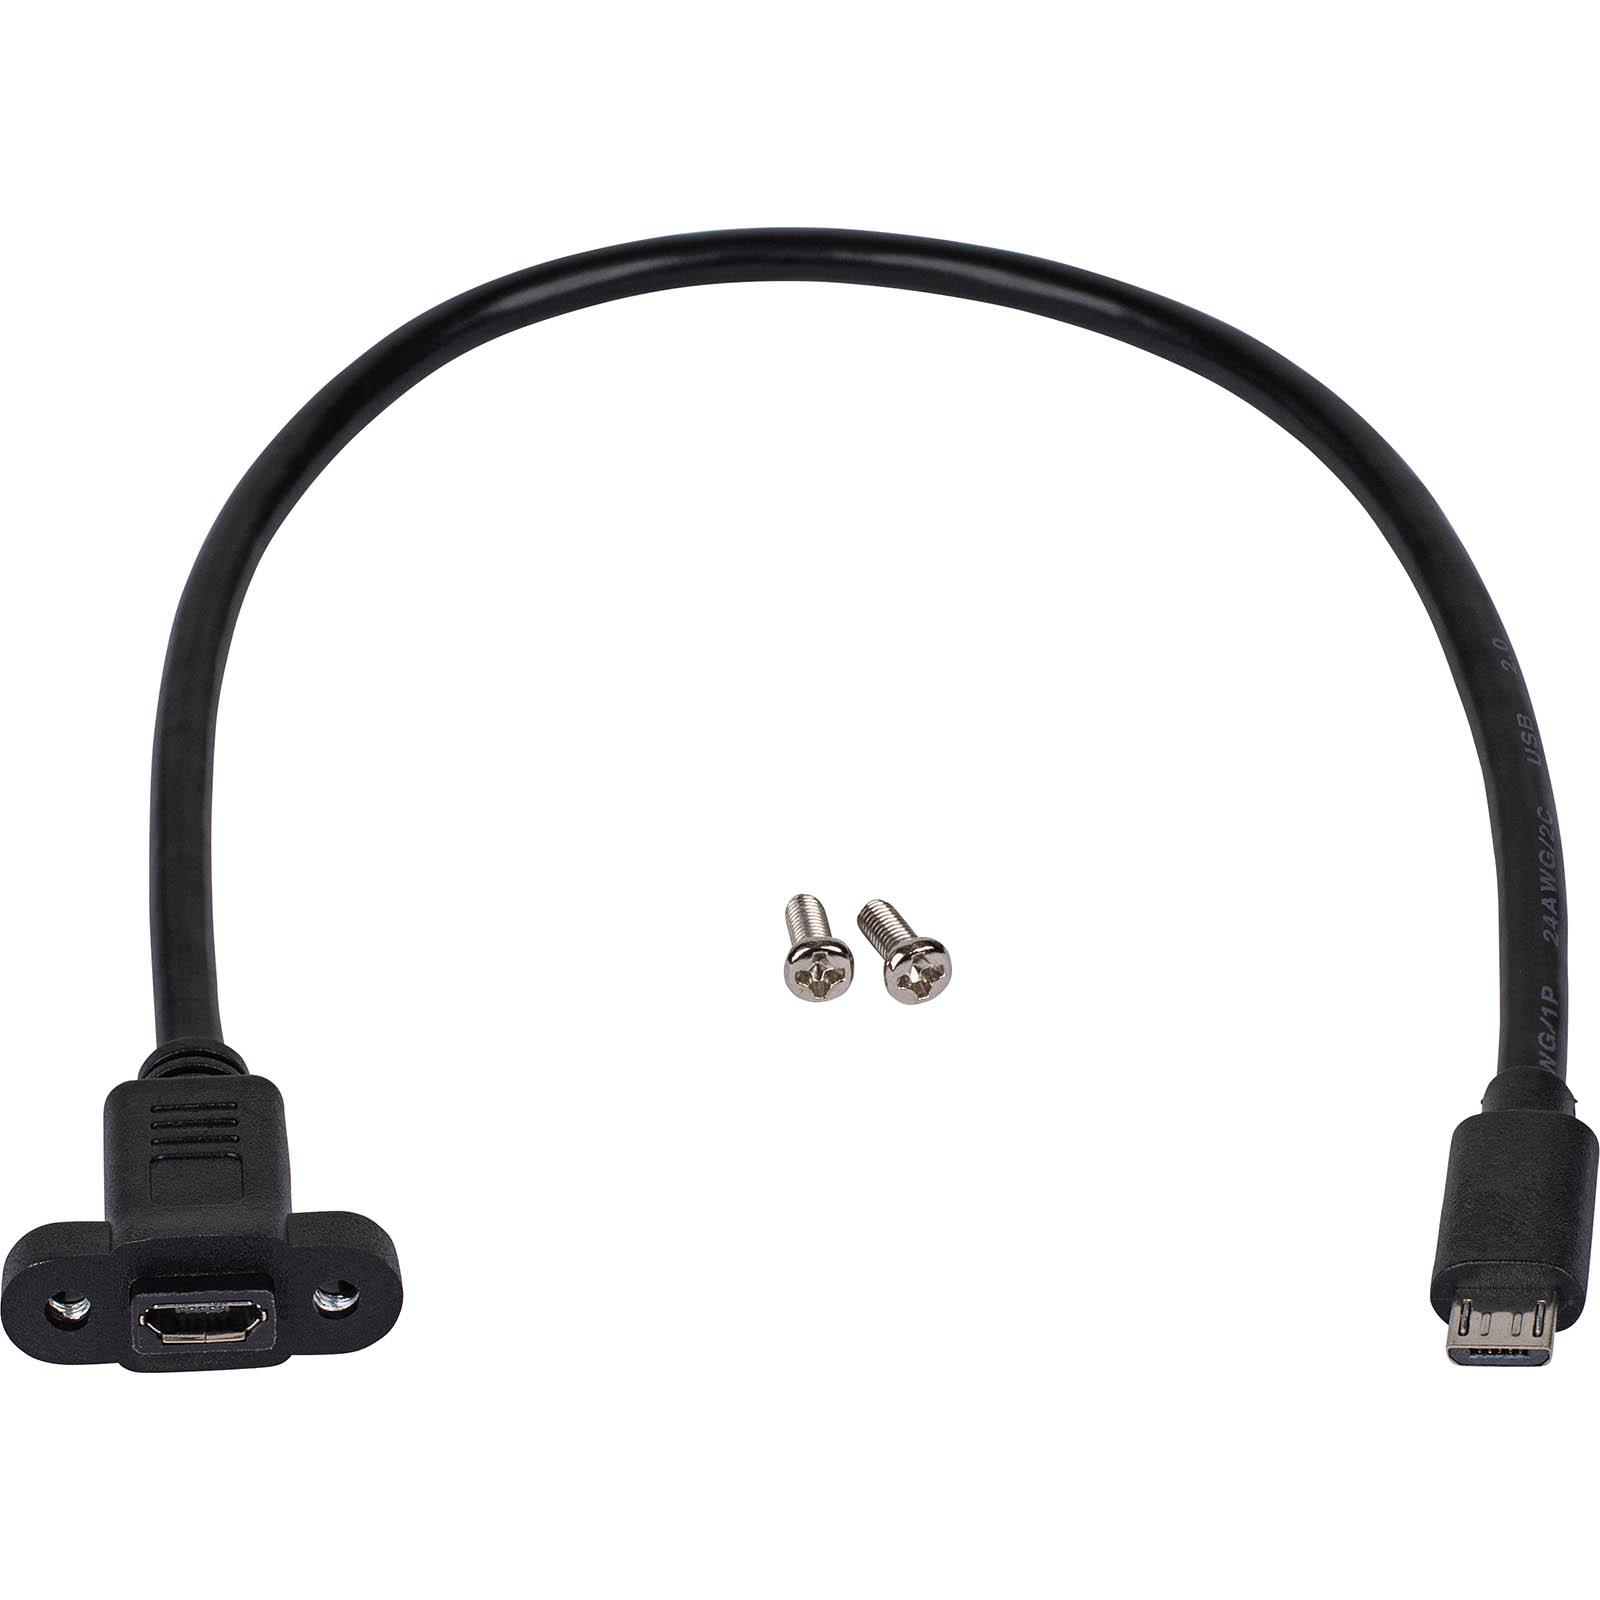 Panel Micro USB Cable Male to Female